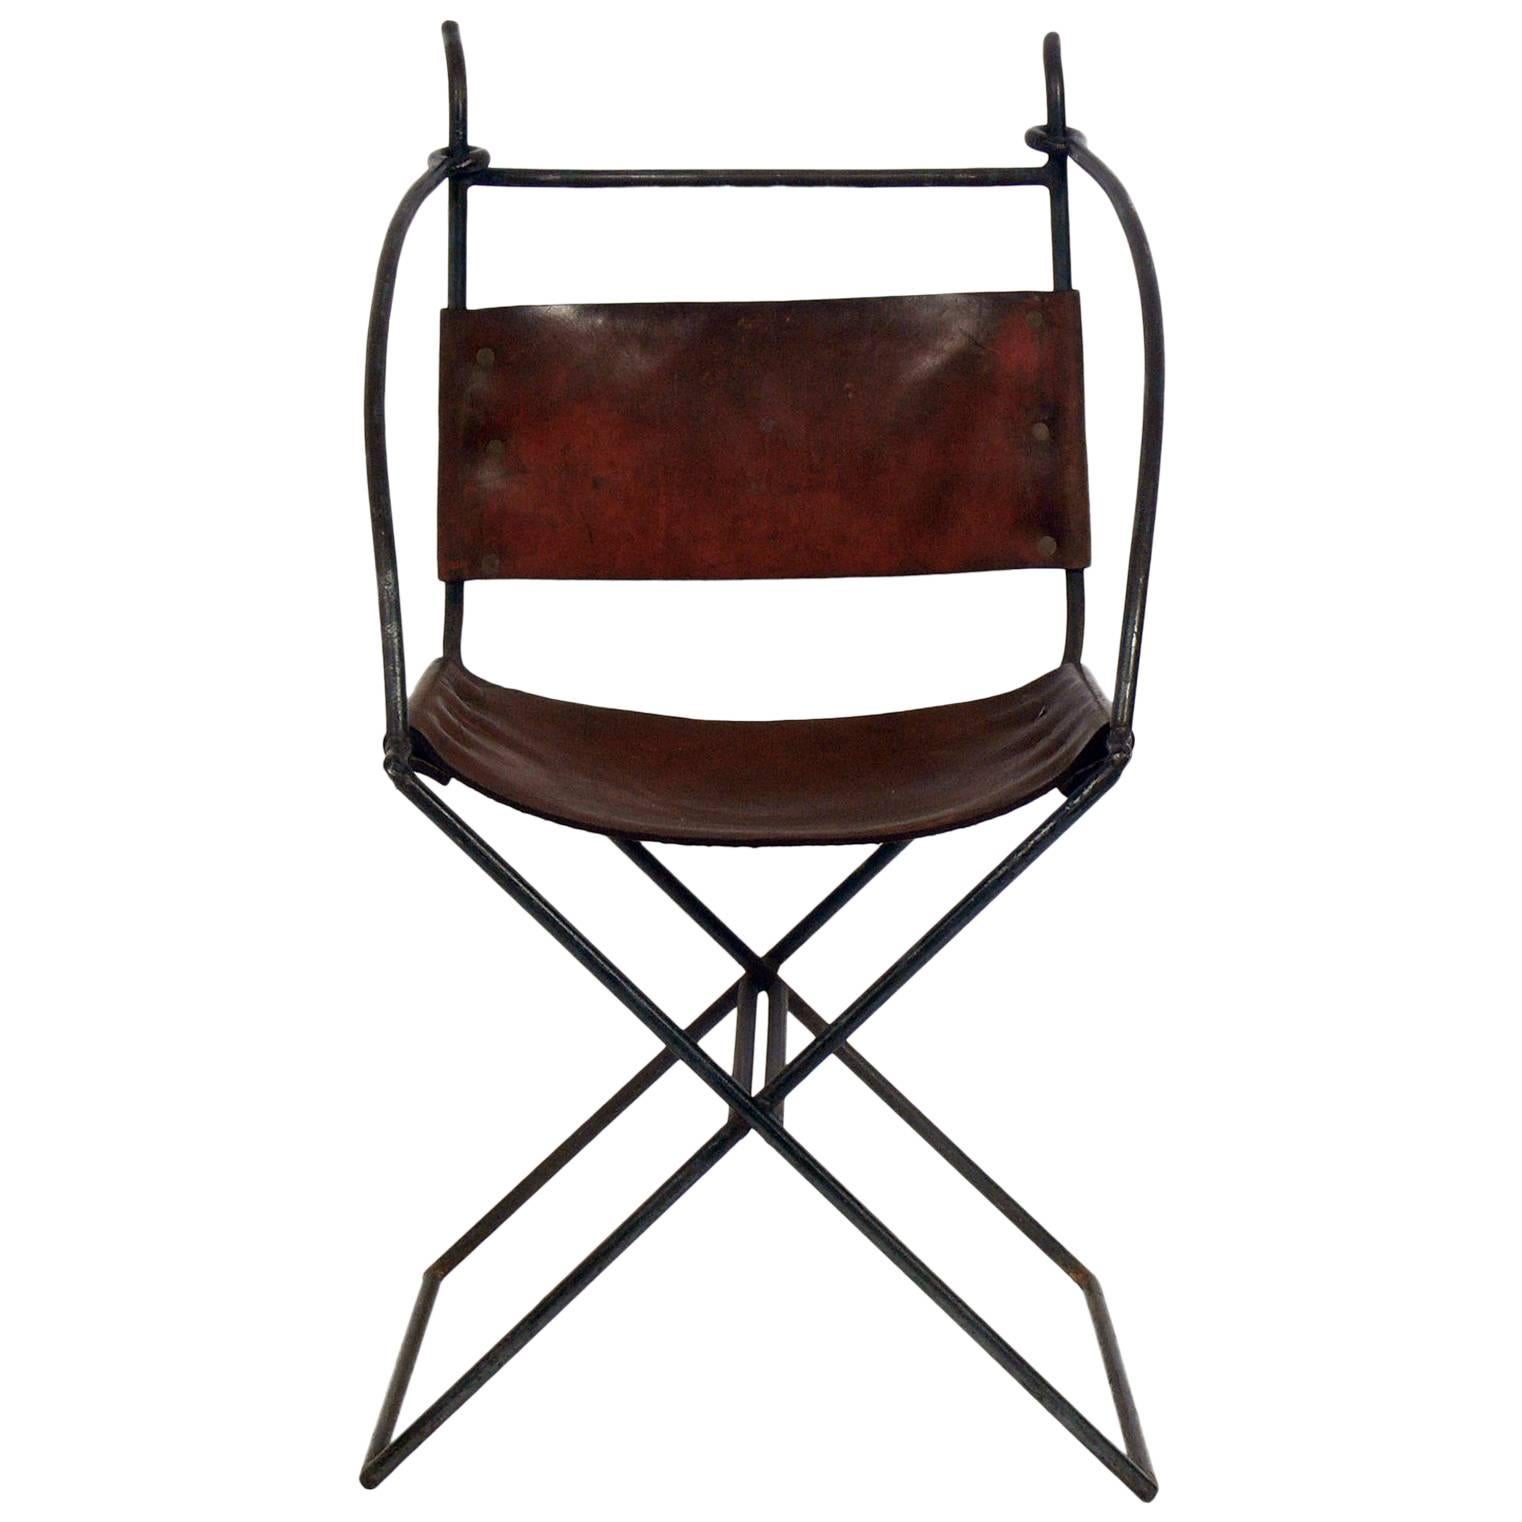 Rustic Modern Iron and Leather Chair